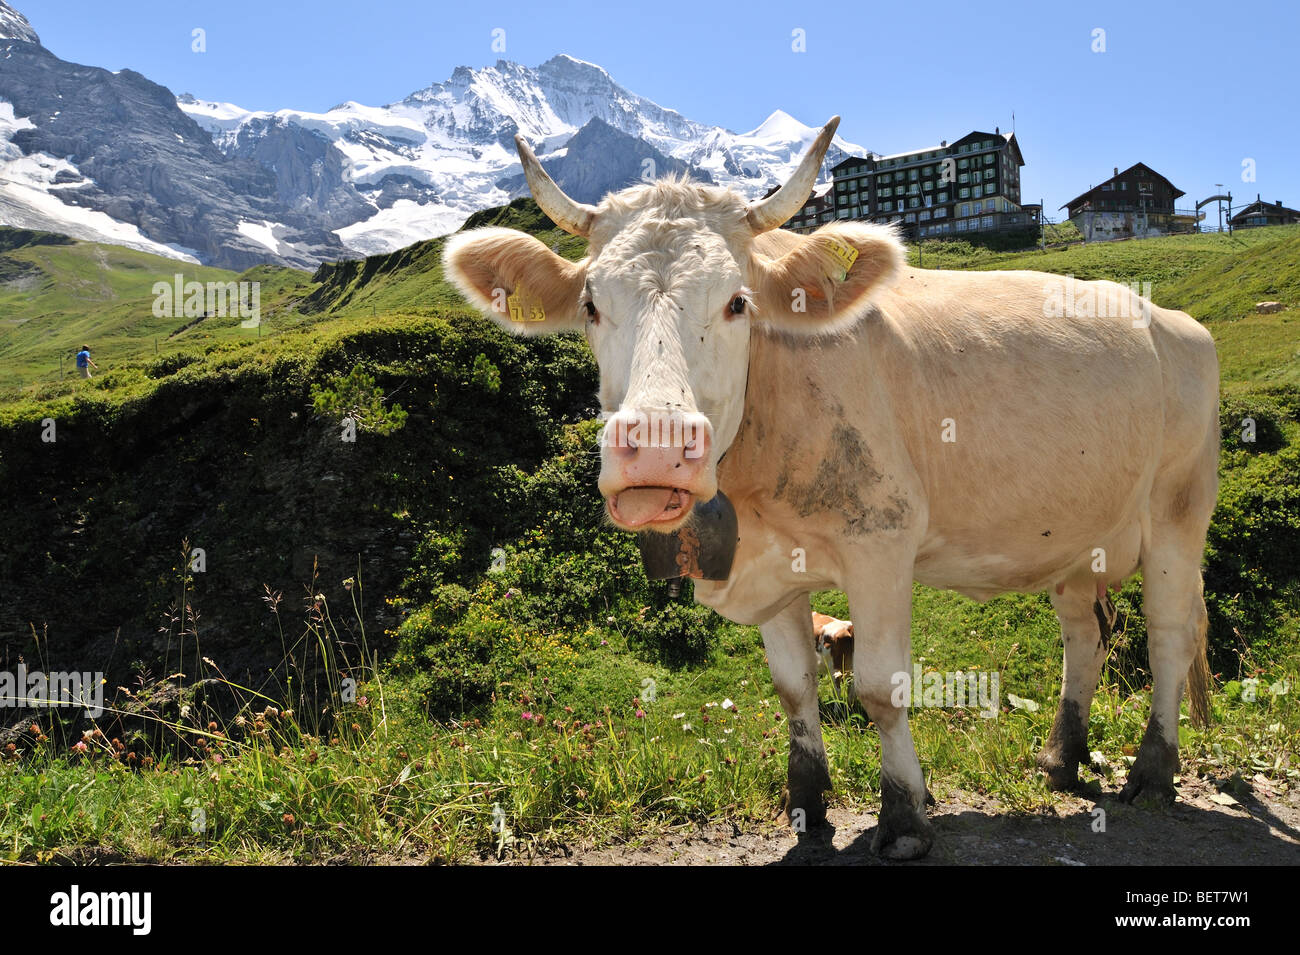 Alpine cow (Bos taurus) with cowbell in meadow, Swiss Alps, Switzerland Stock Photo